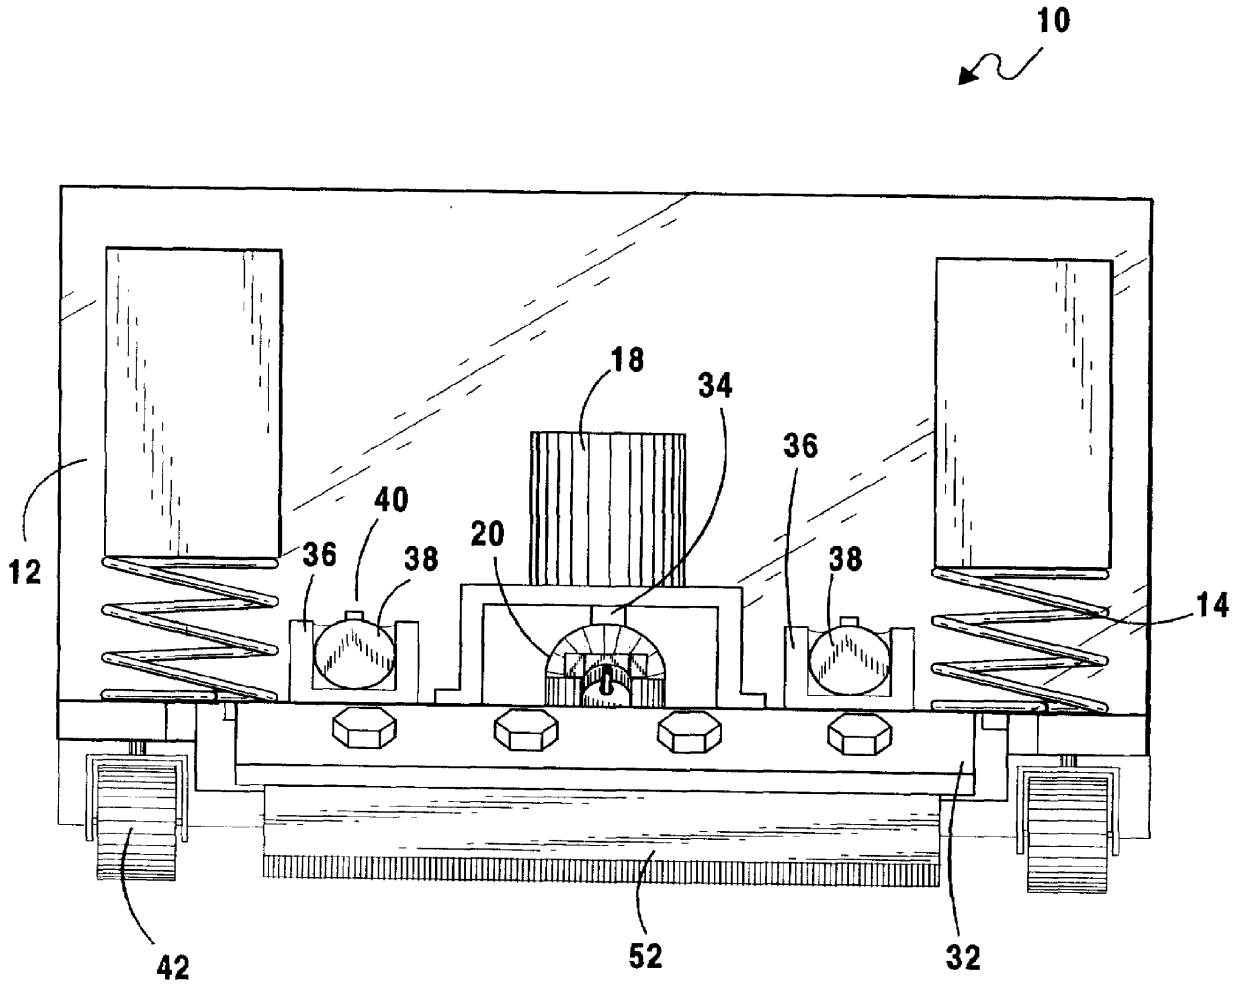 Apparatus for floor covering removal